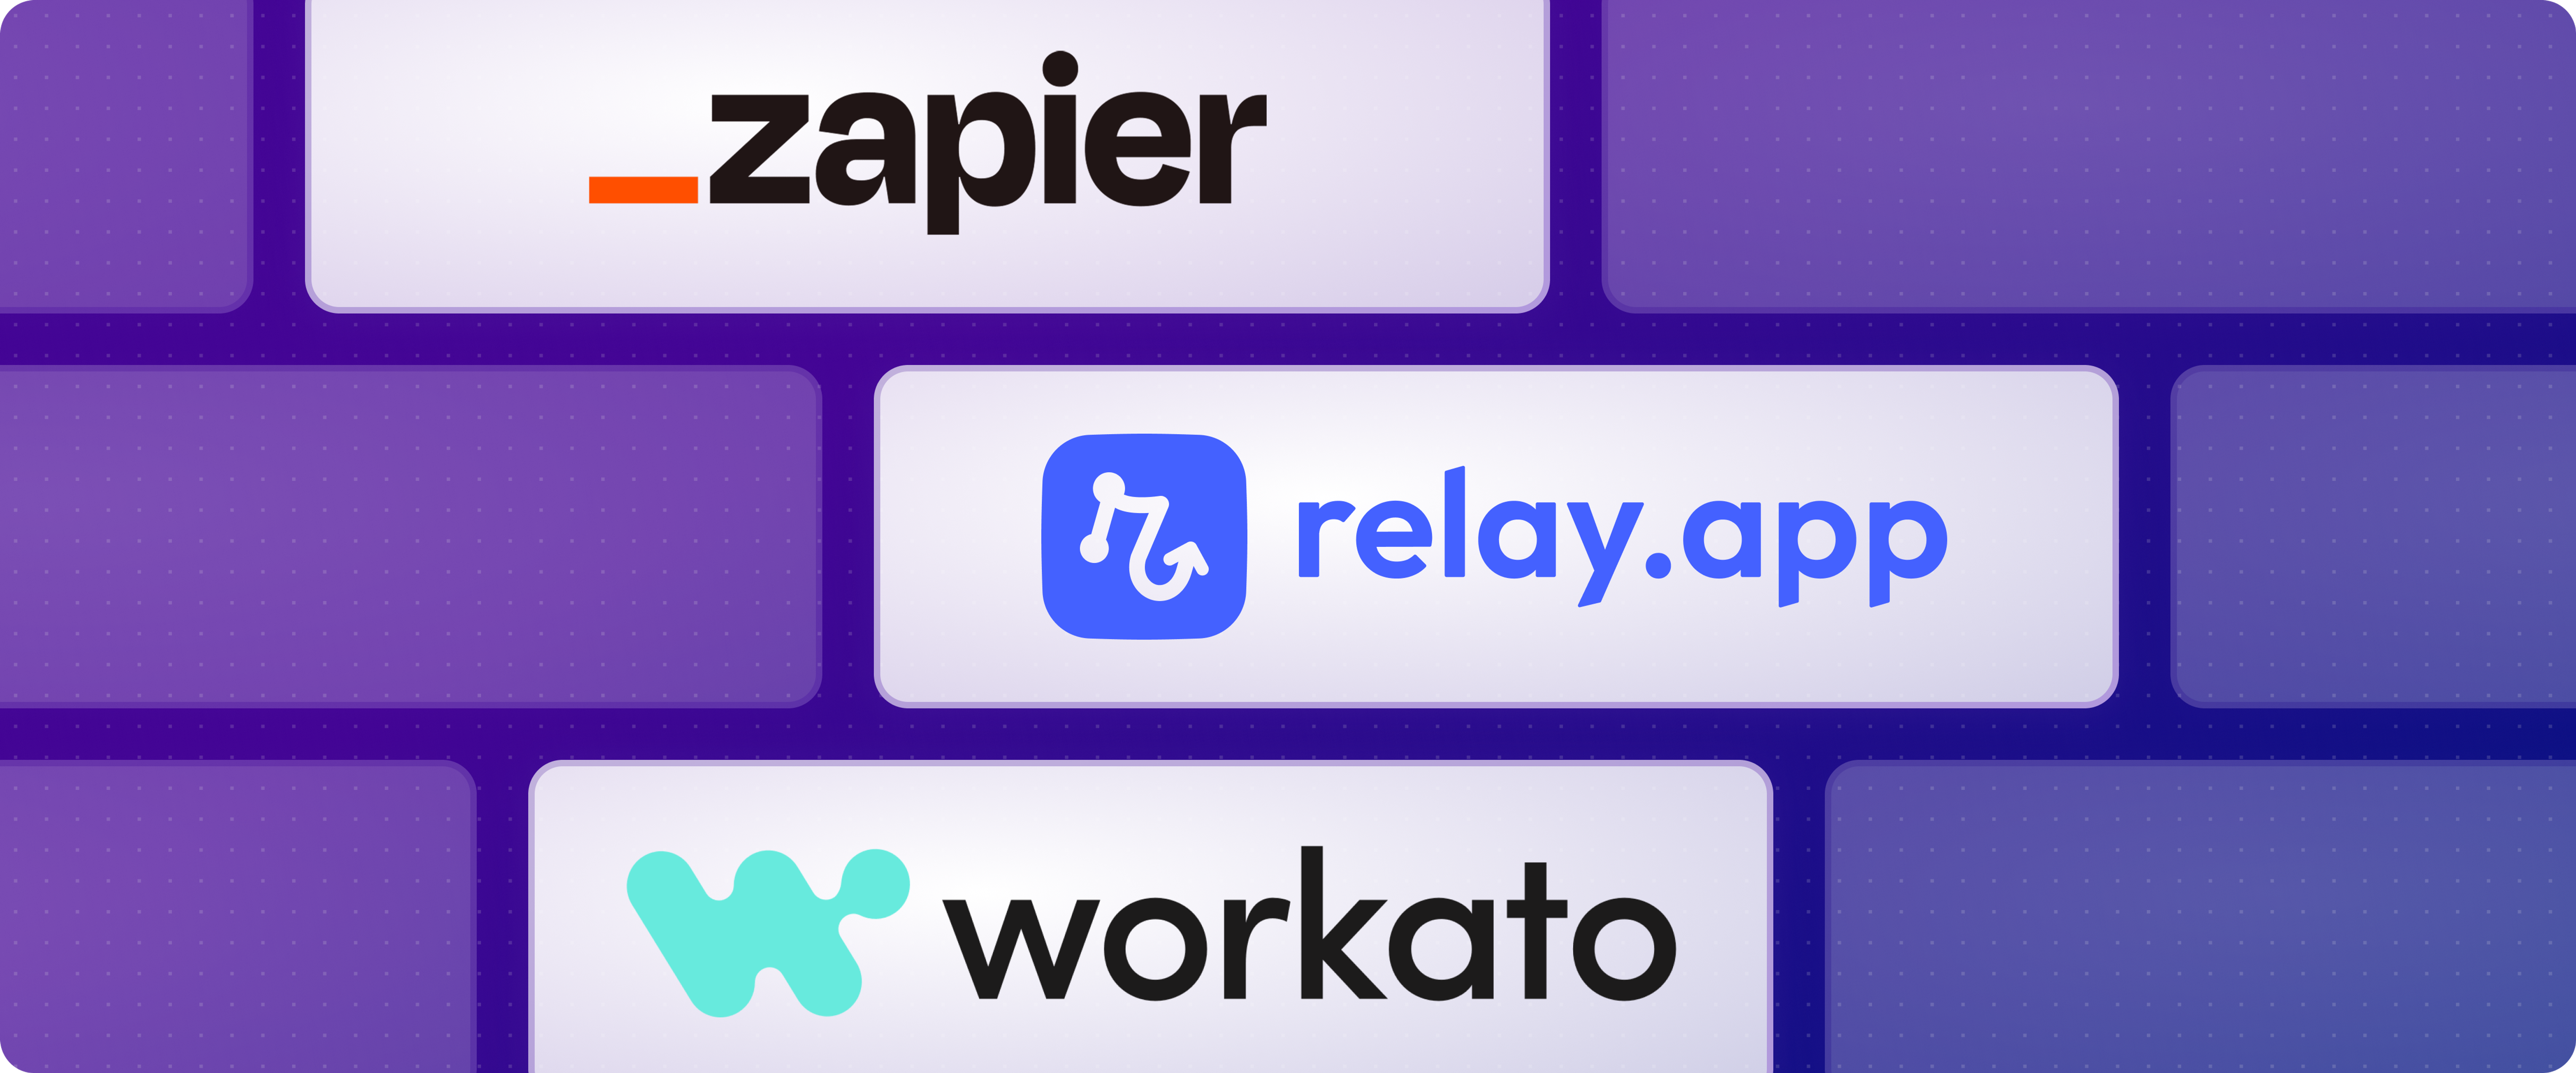 Thumbnail for this article comparing Zapier to Workato and Relay.app